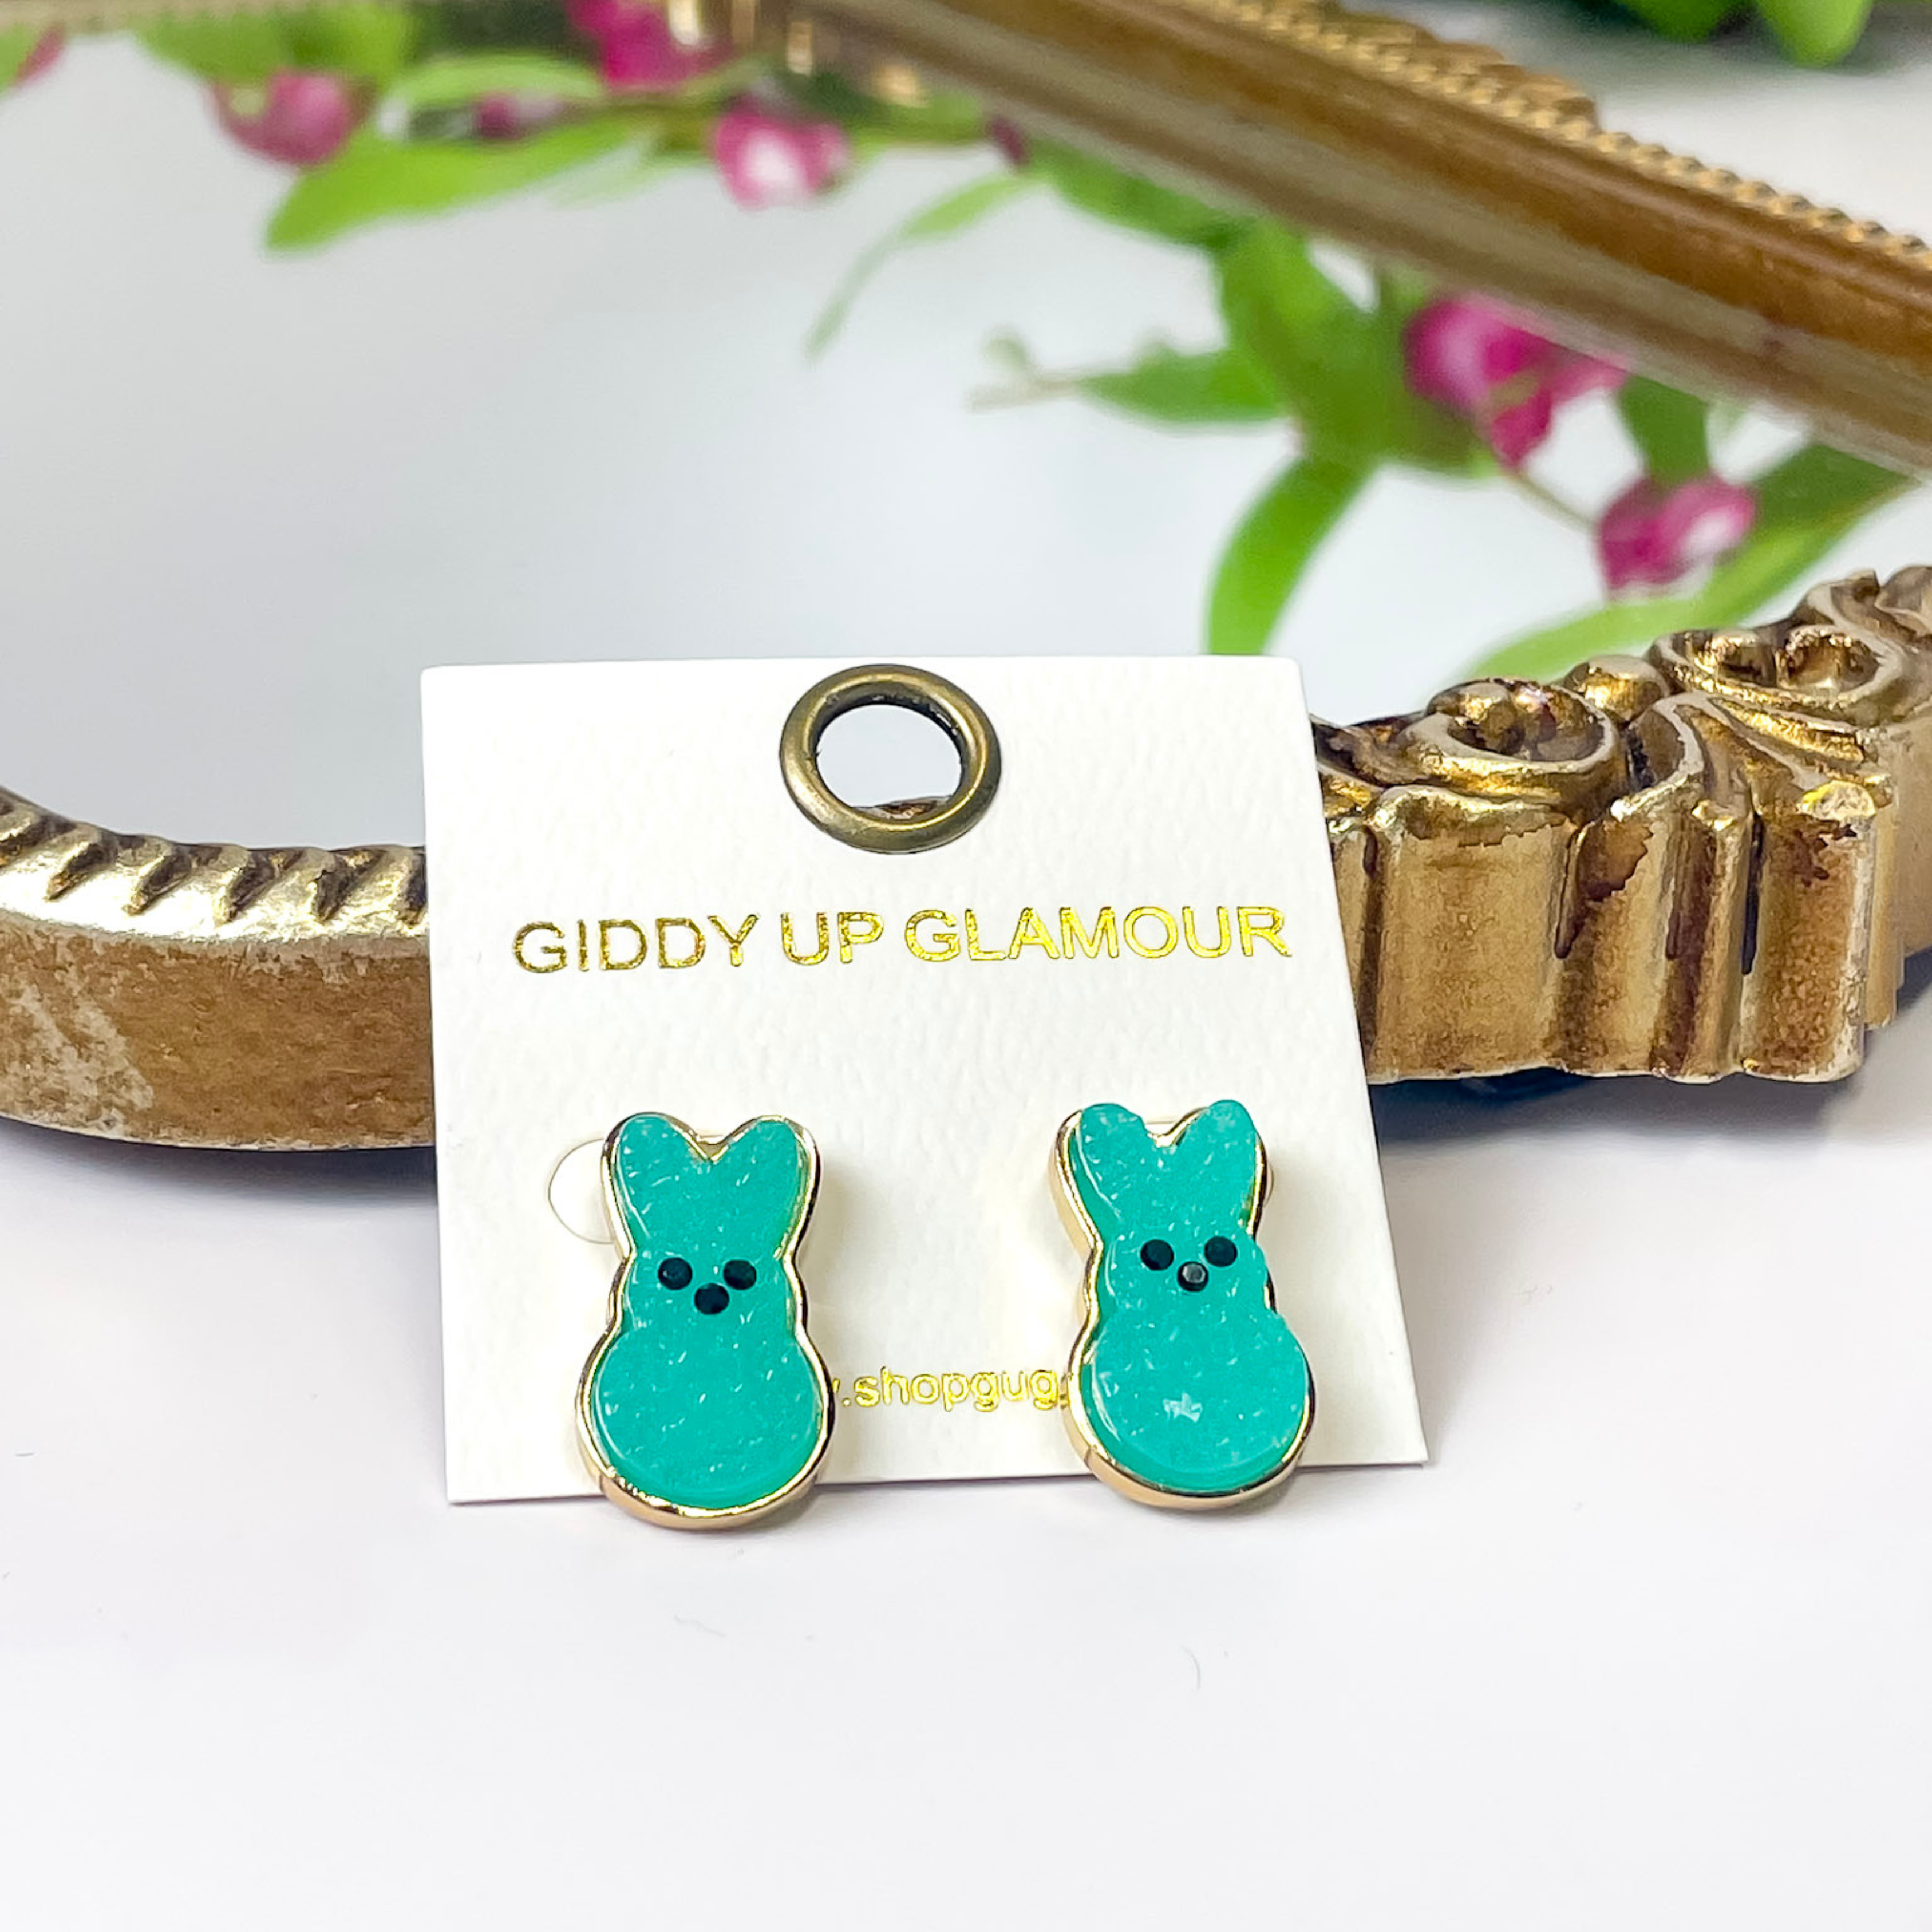 Bunny Stud Earrings in Green - Giddy Up Glamour Boutique